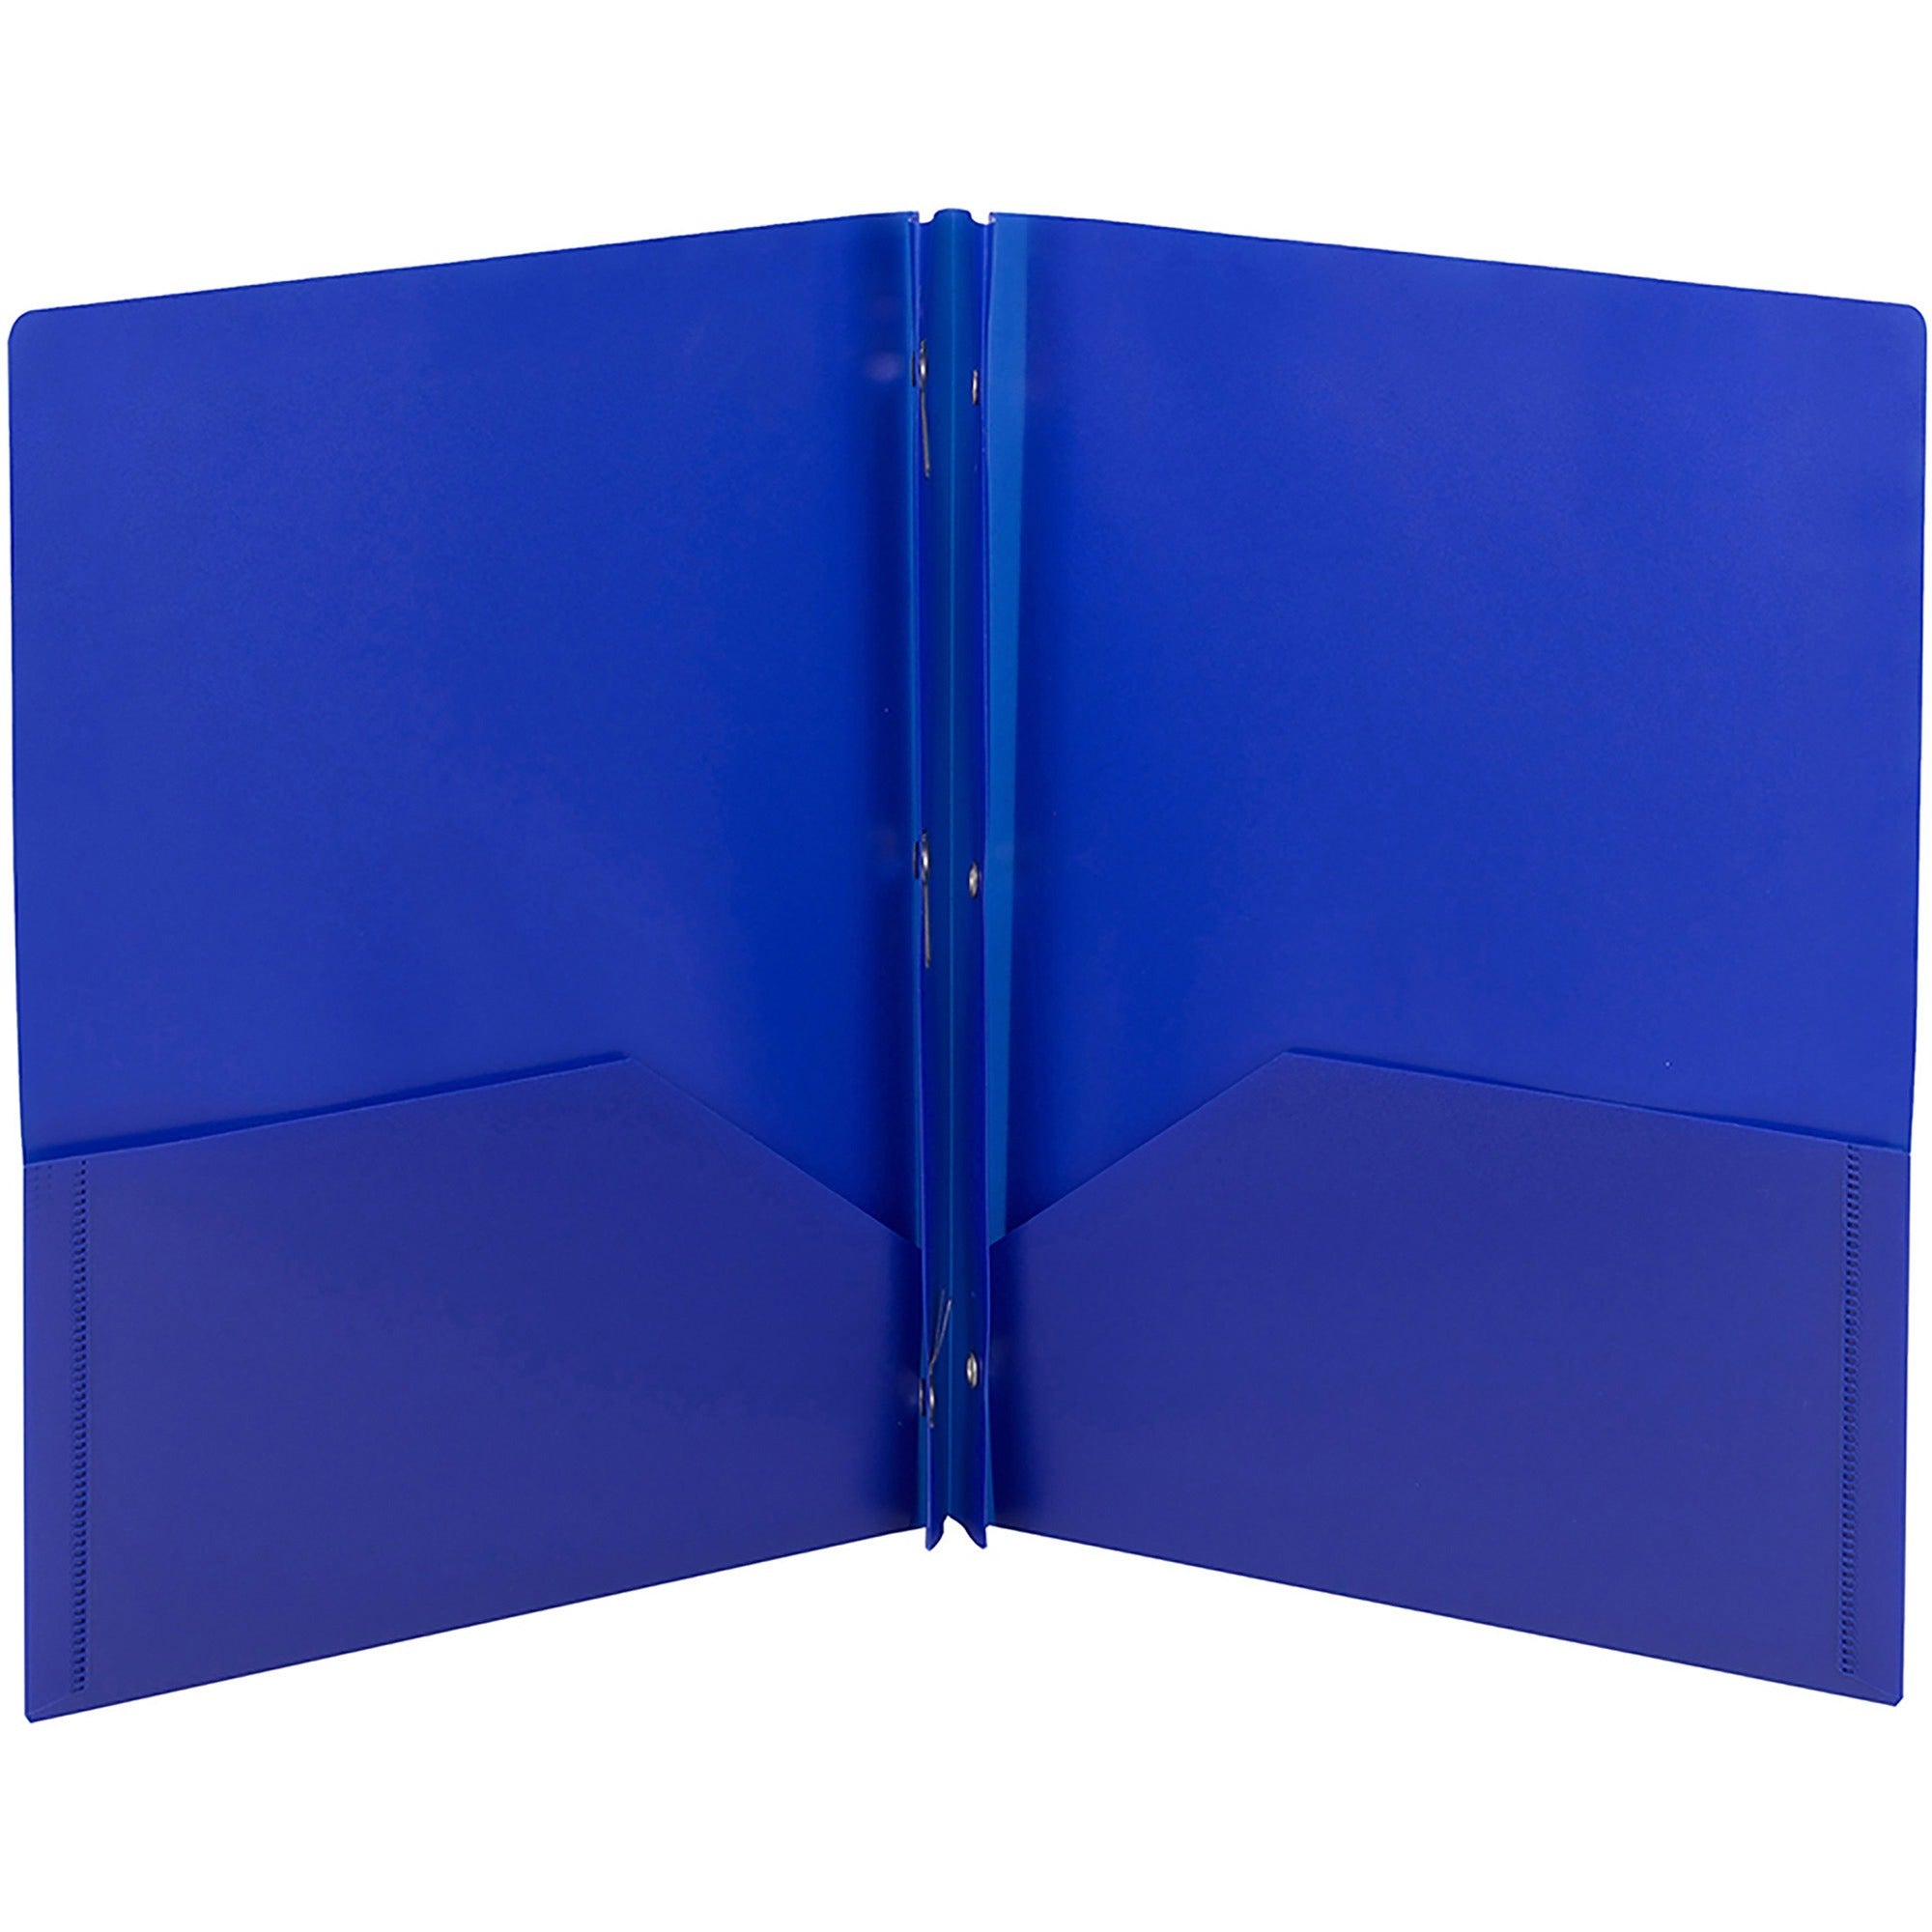 smead-letter-fastener-folder-8-1-2-x-11-180-sheet-capacity-2-x-double-tang-fasteners-2-inside-back-pockets-blue-72-carton_smd87731 - 1